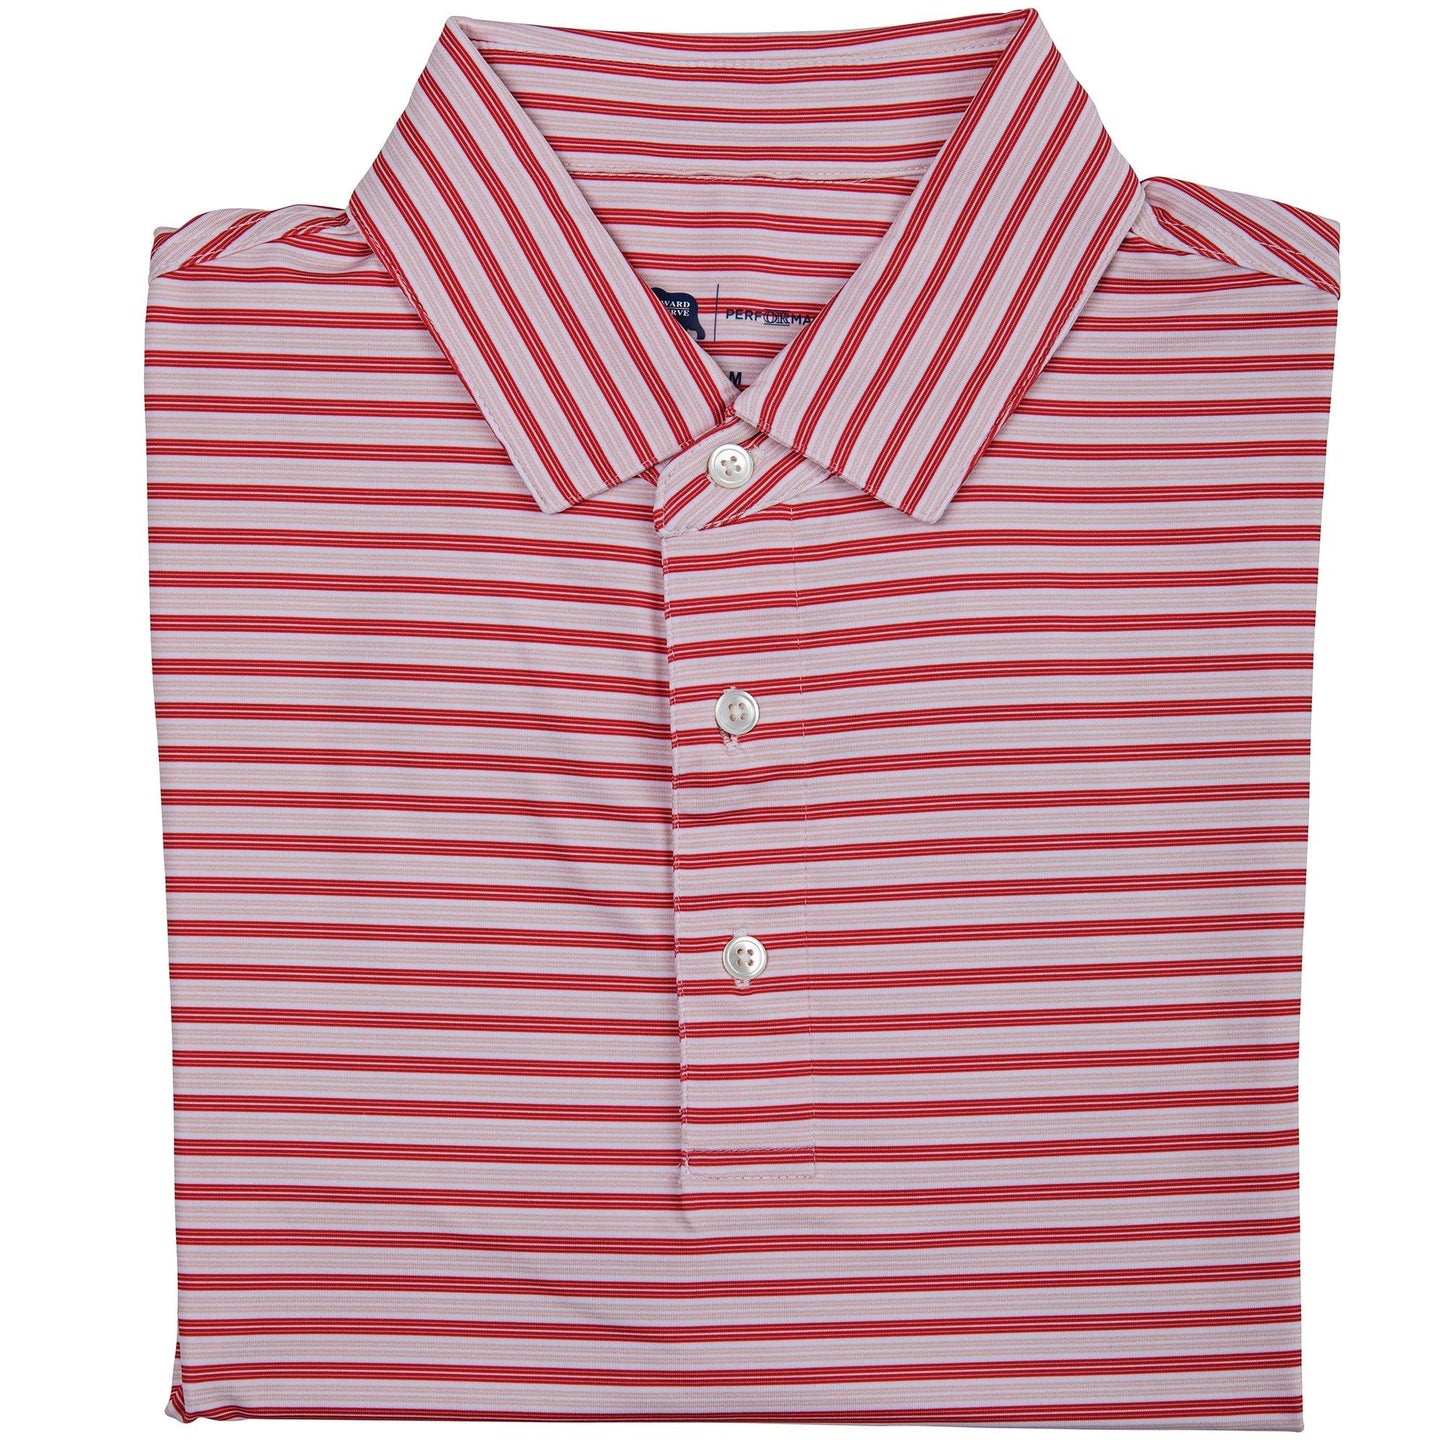 Wedge Stripe Performance Polo - Red - Onward Reserve